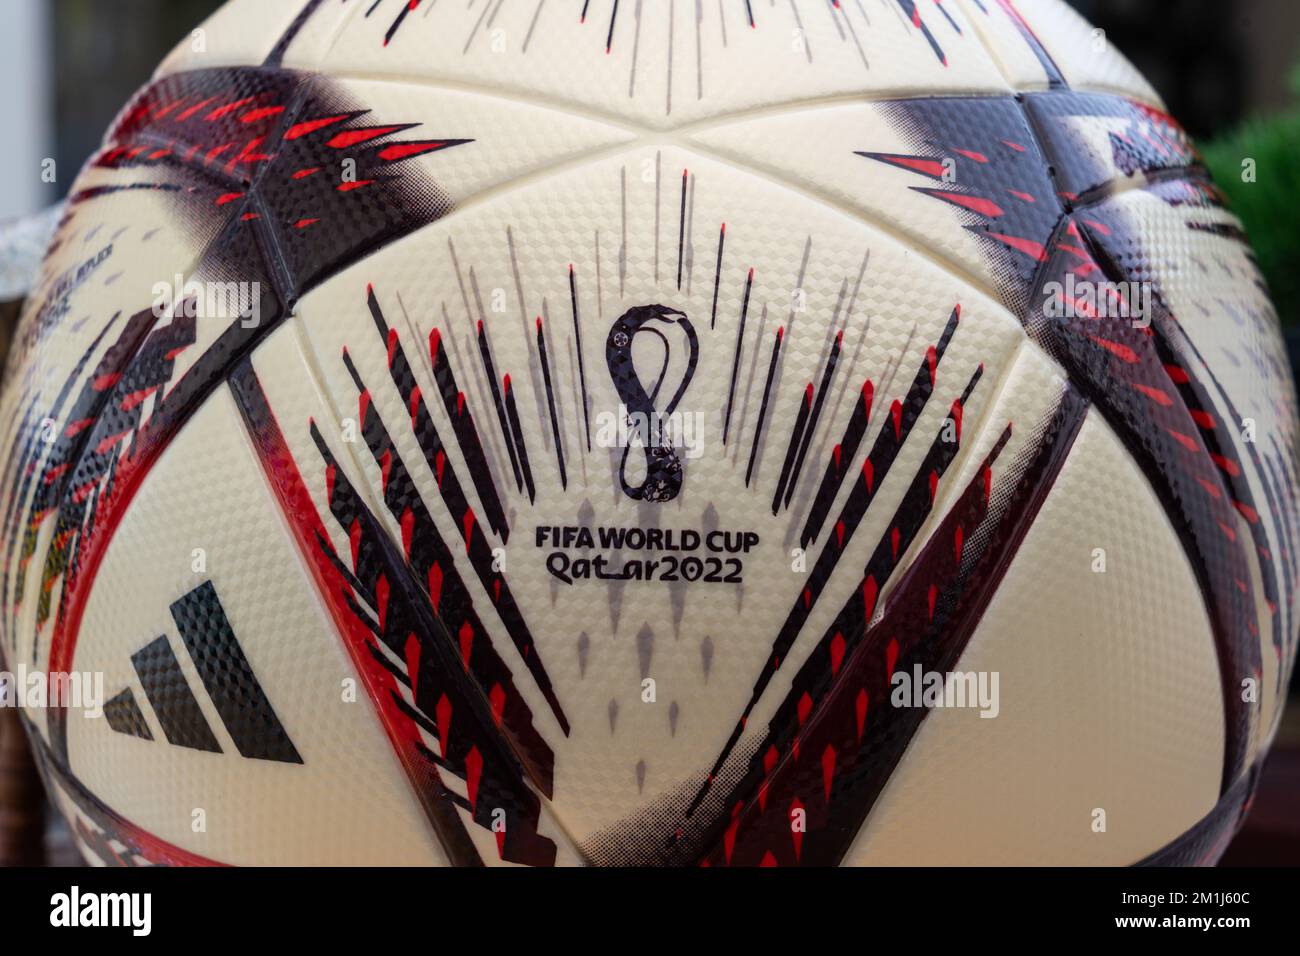 Close up of the adidas Al Hilm ball which is the official match ball used in the FIFA World Cup 2022 Qatar semi-finals and final. Stock Photo